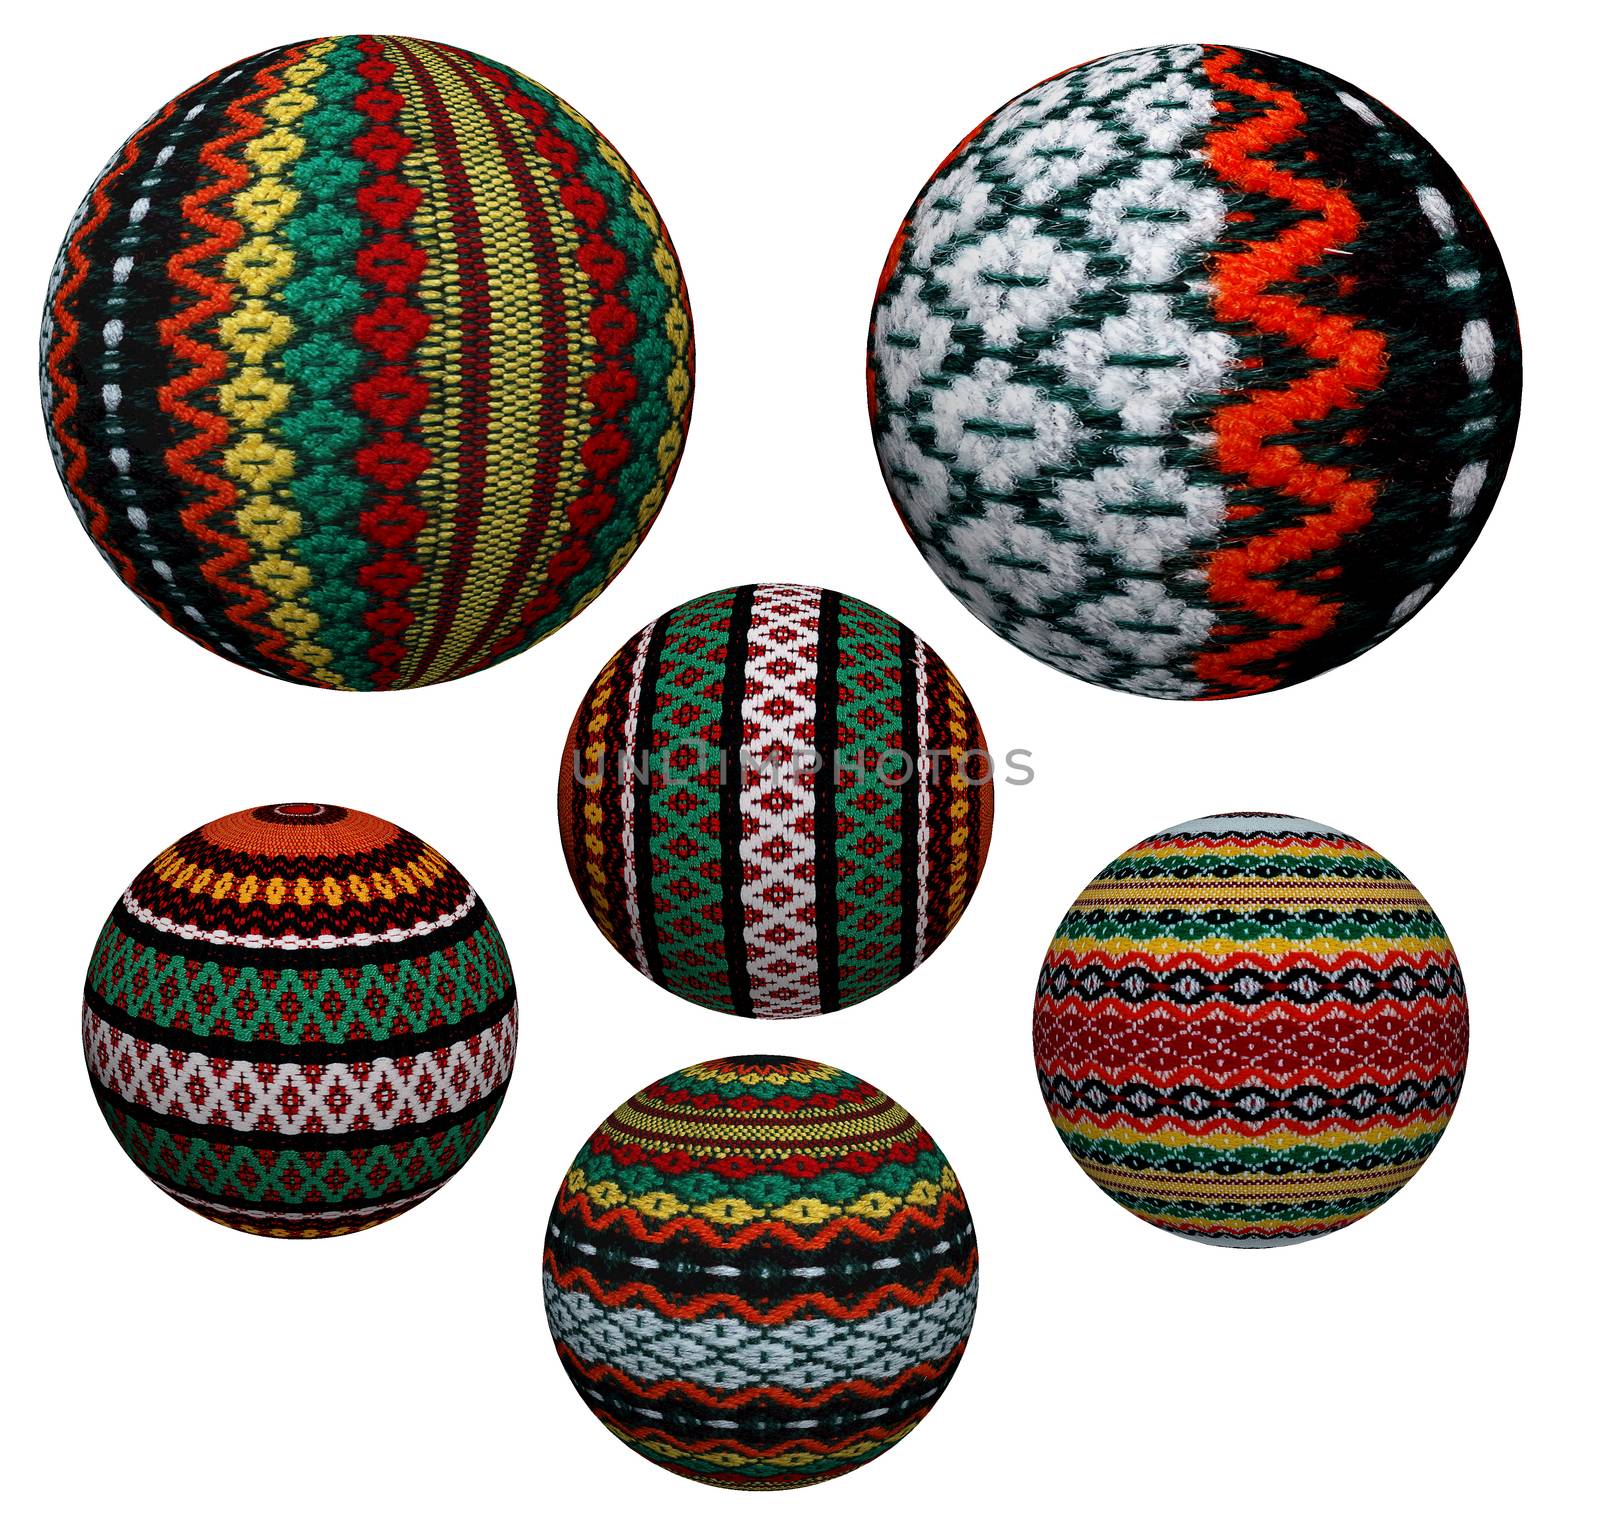 Collection of attractive decorative colored balls made of fabric. Suitable for Christmas and more.